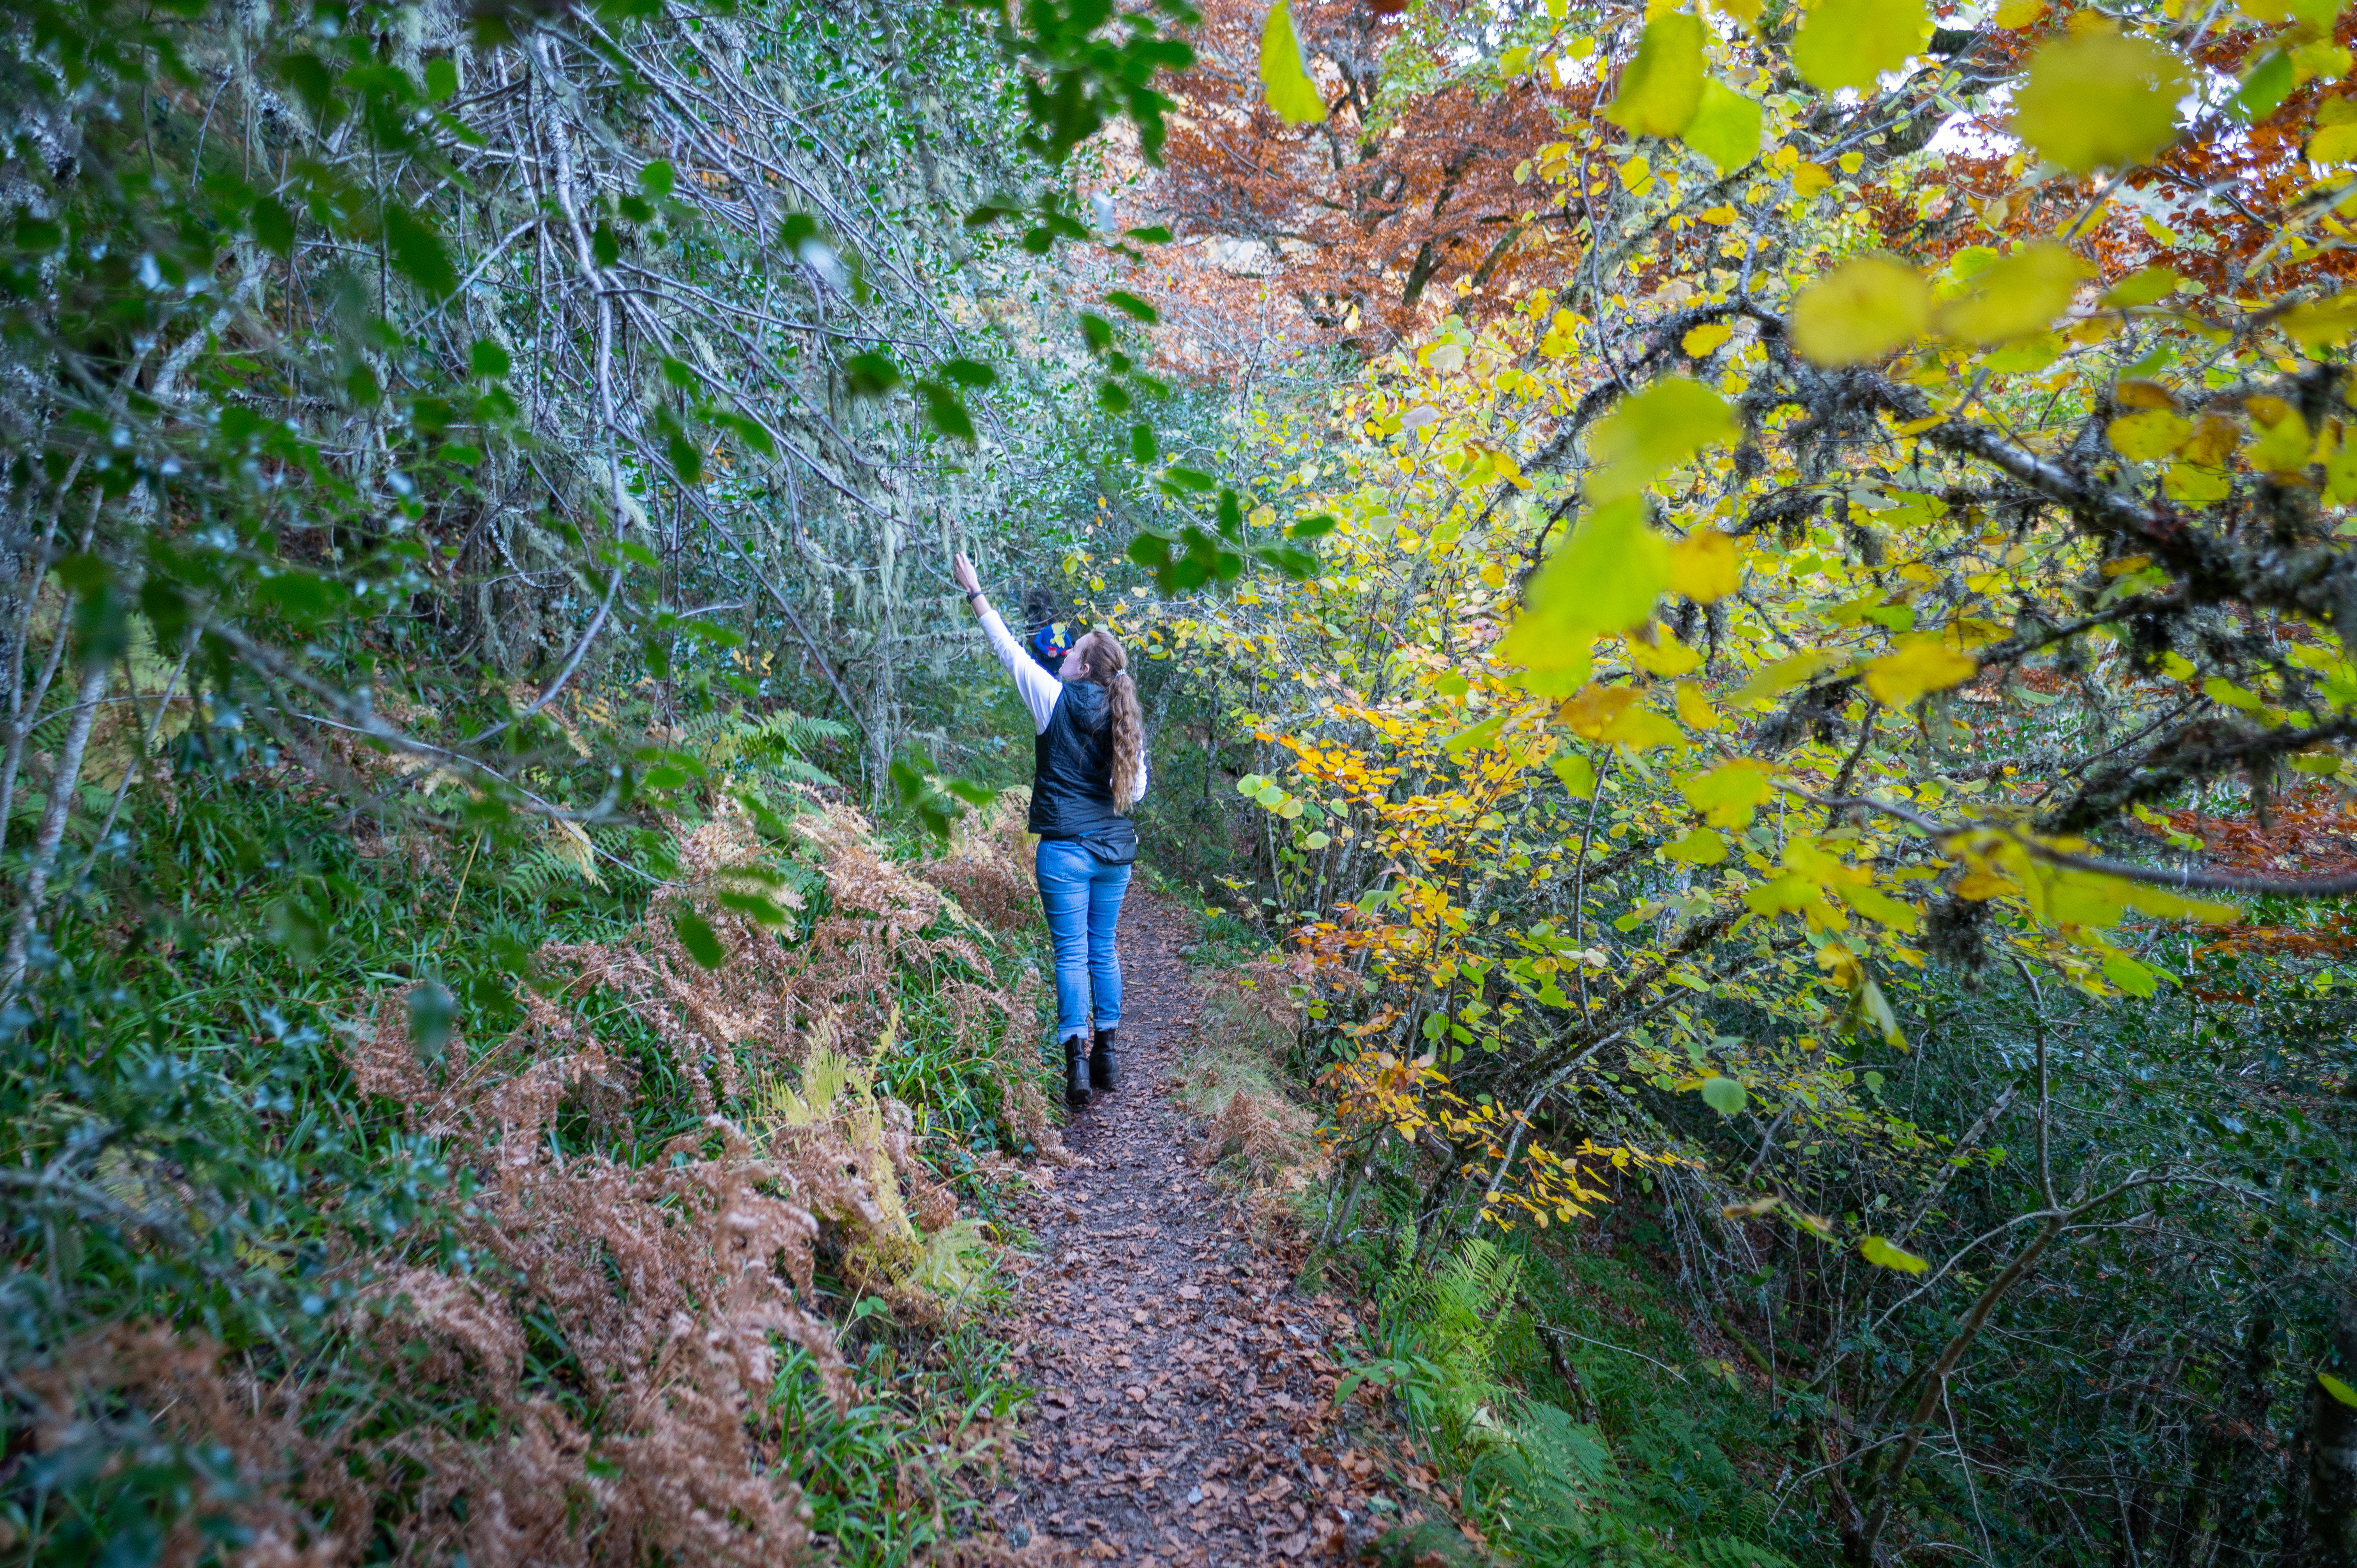 Woman walking in autumnal forest reaches up to touch tree leaves